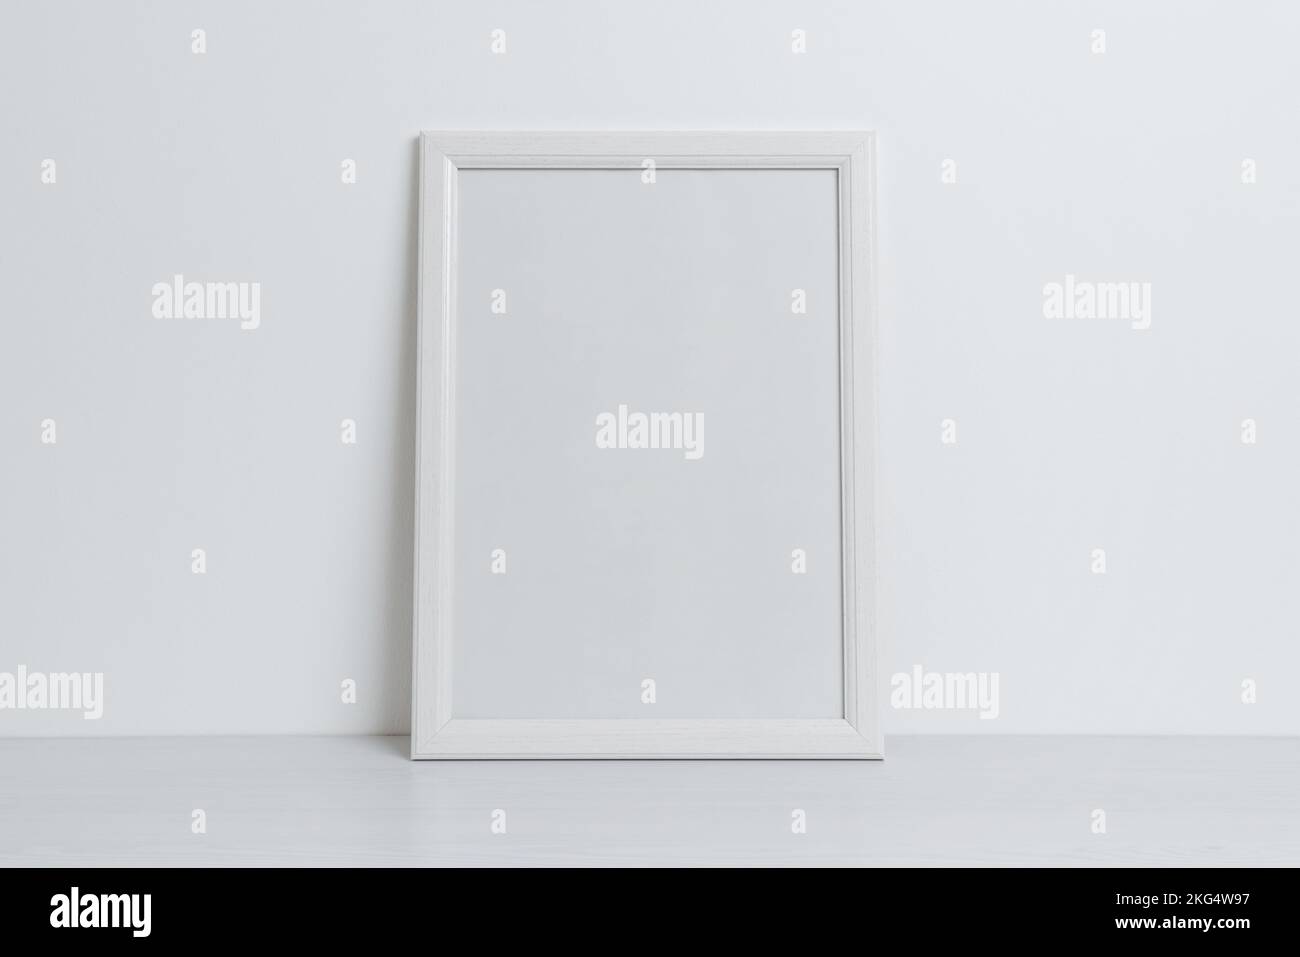 White picture frame mockup leaning against the wall. Clean, blank surface for art presentation Stock Photo